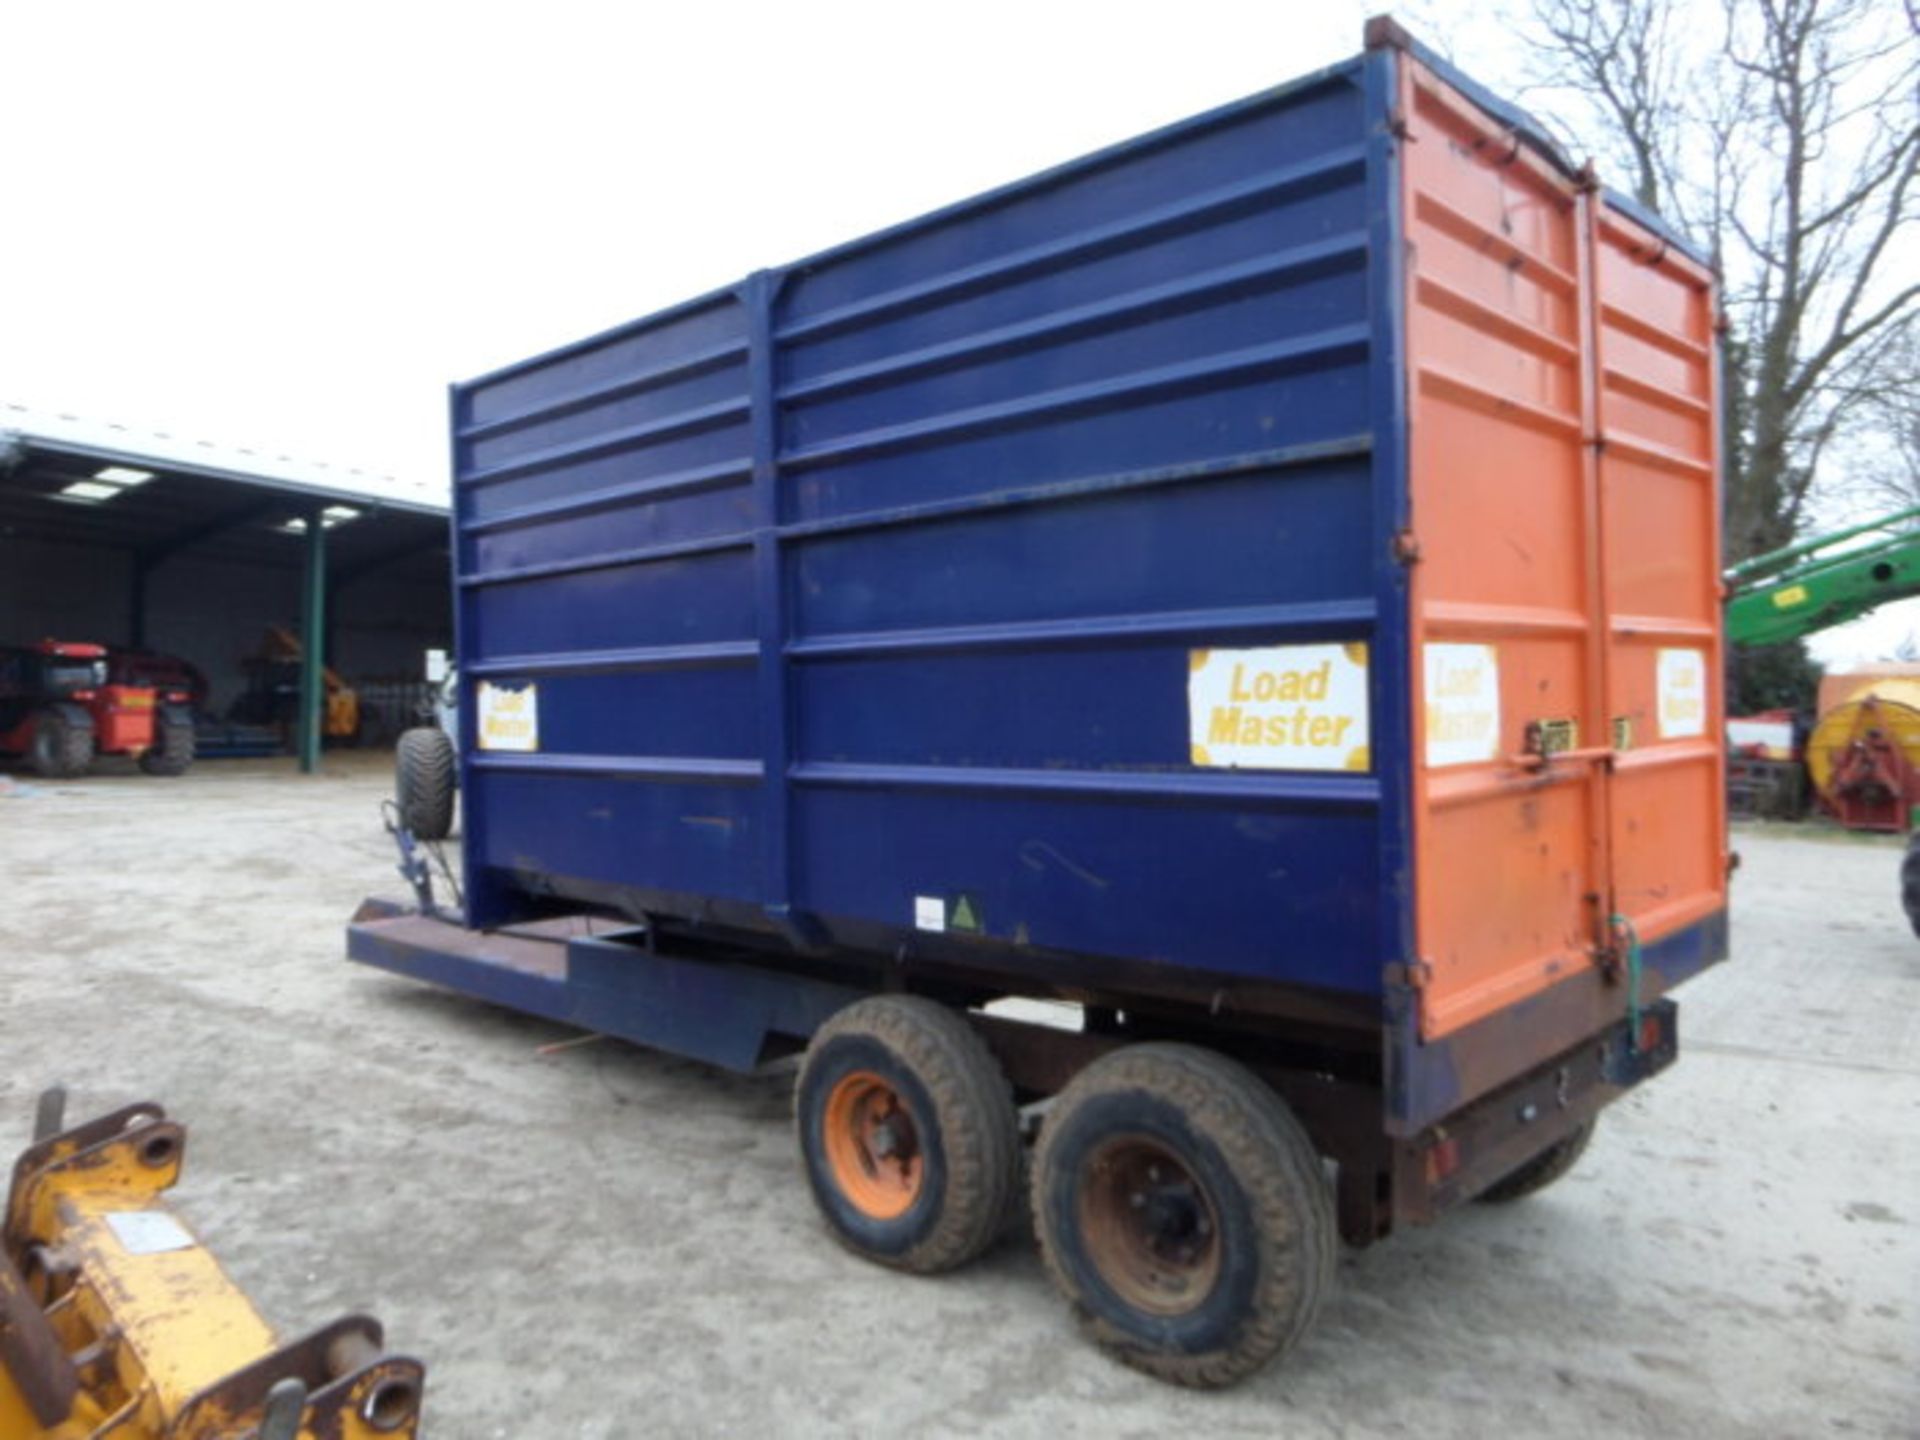 FOSTER 8 TONNE LOAD MASTER TIPPING TRAILER - Image 6 of 6